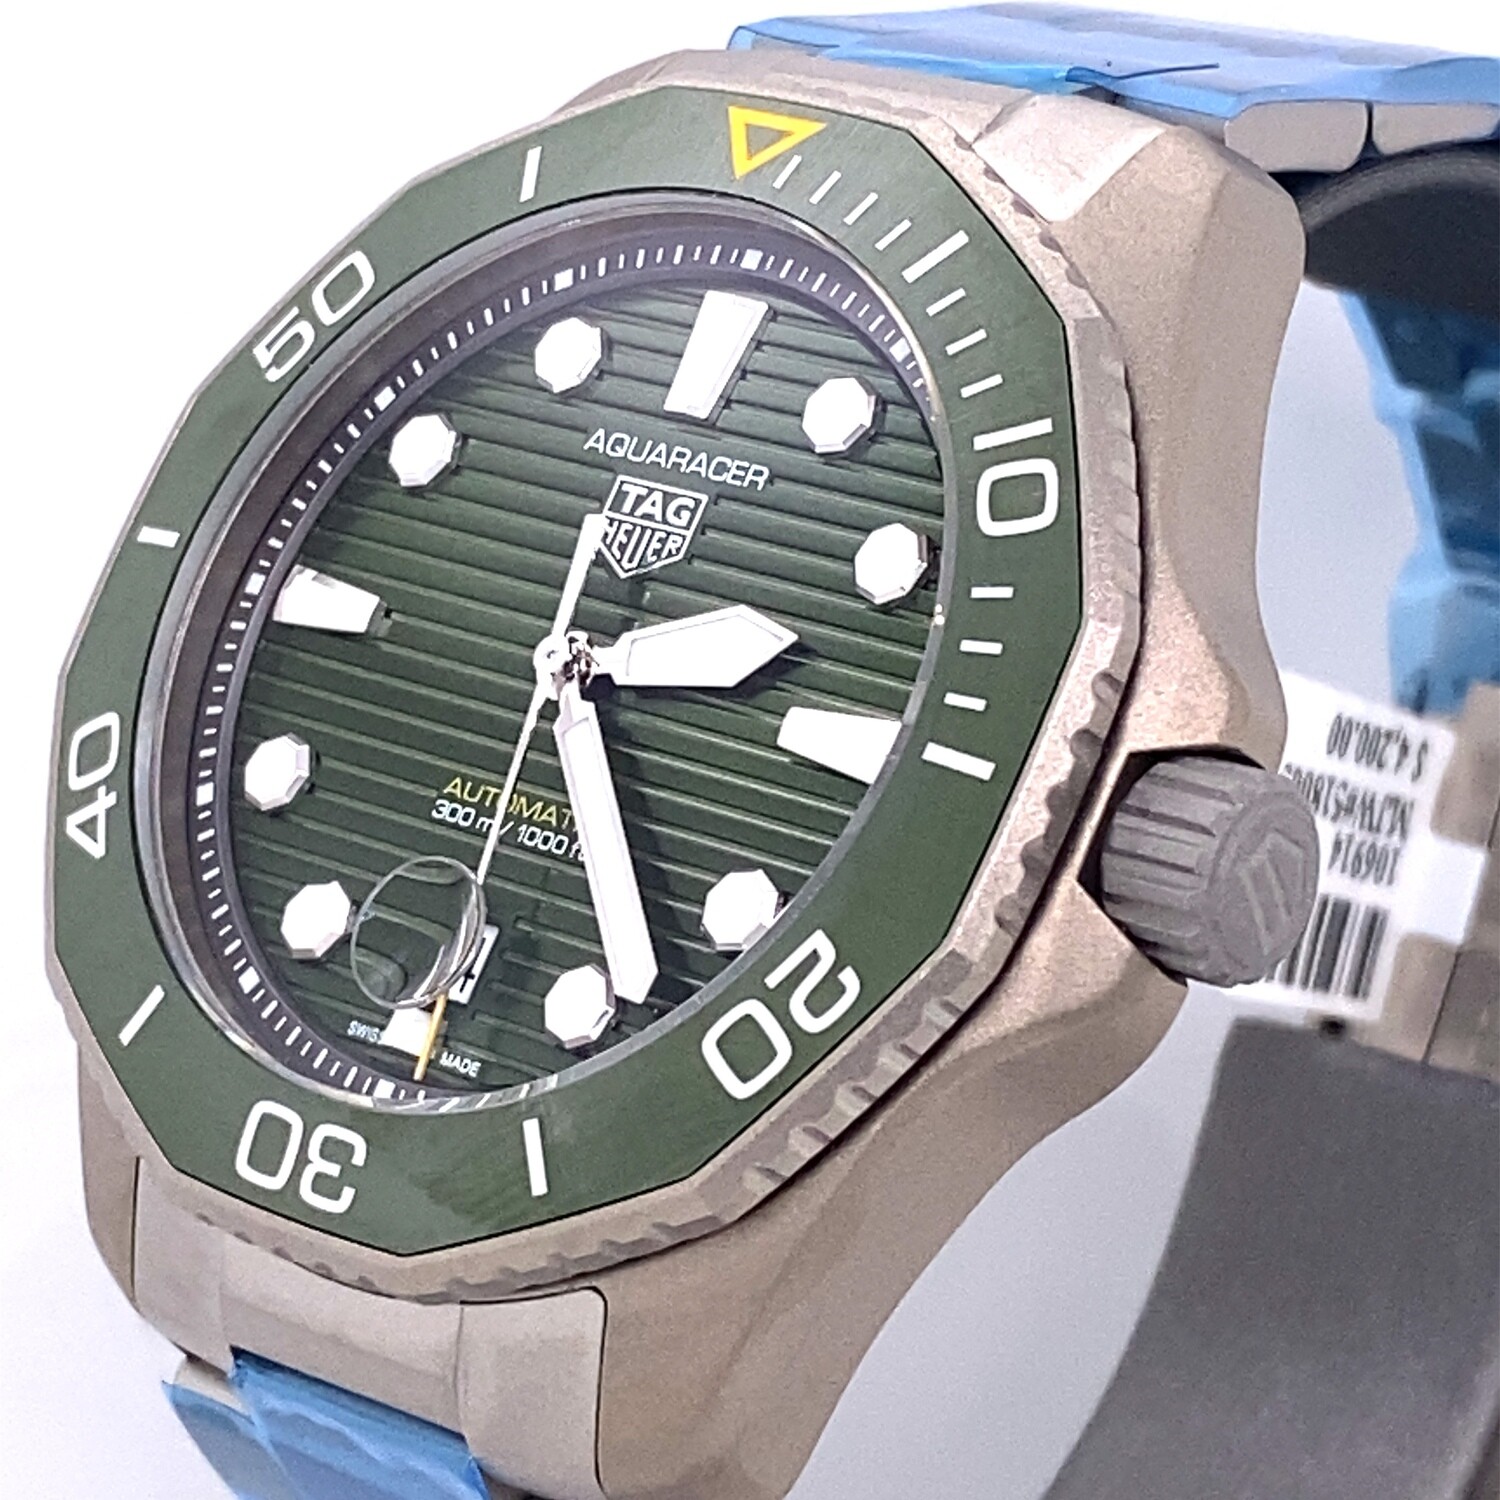 Tag Heuer Aquaracer Automatic Green Dial Men's Watch WBP208B.BF0631